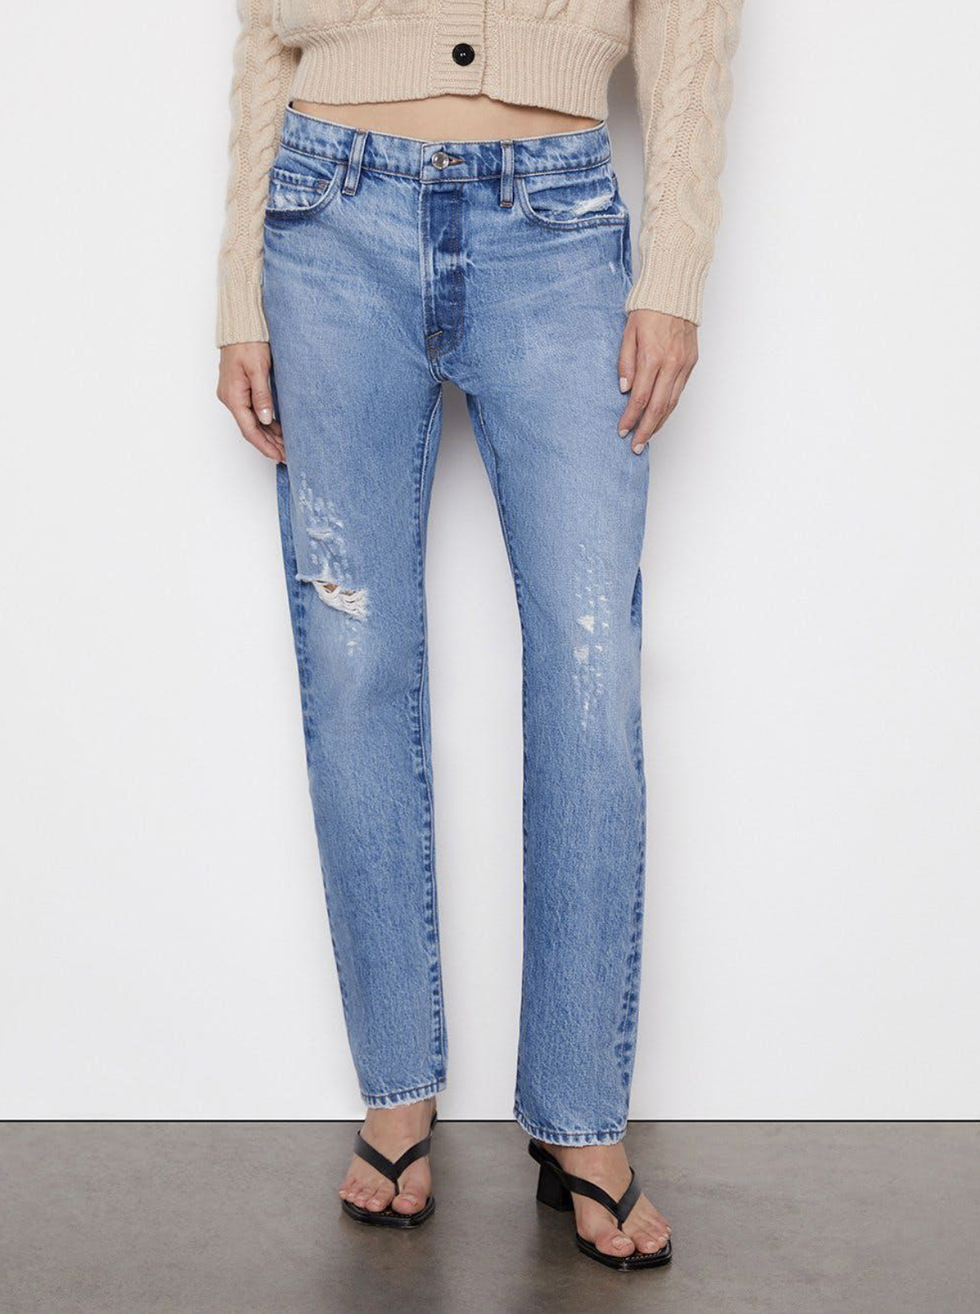 14 Best Women's Baggy Jeans to Shop Now: Baggy Jeans for Women